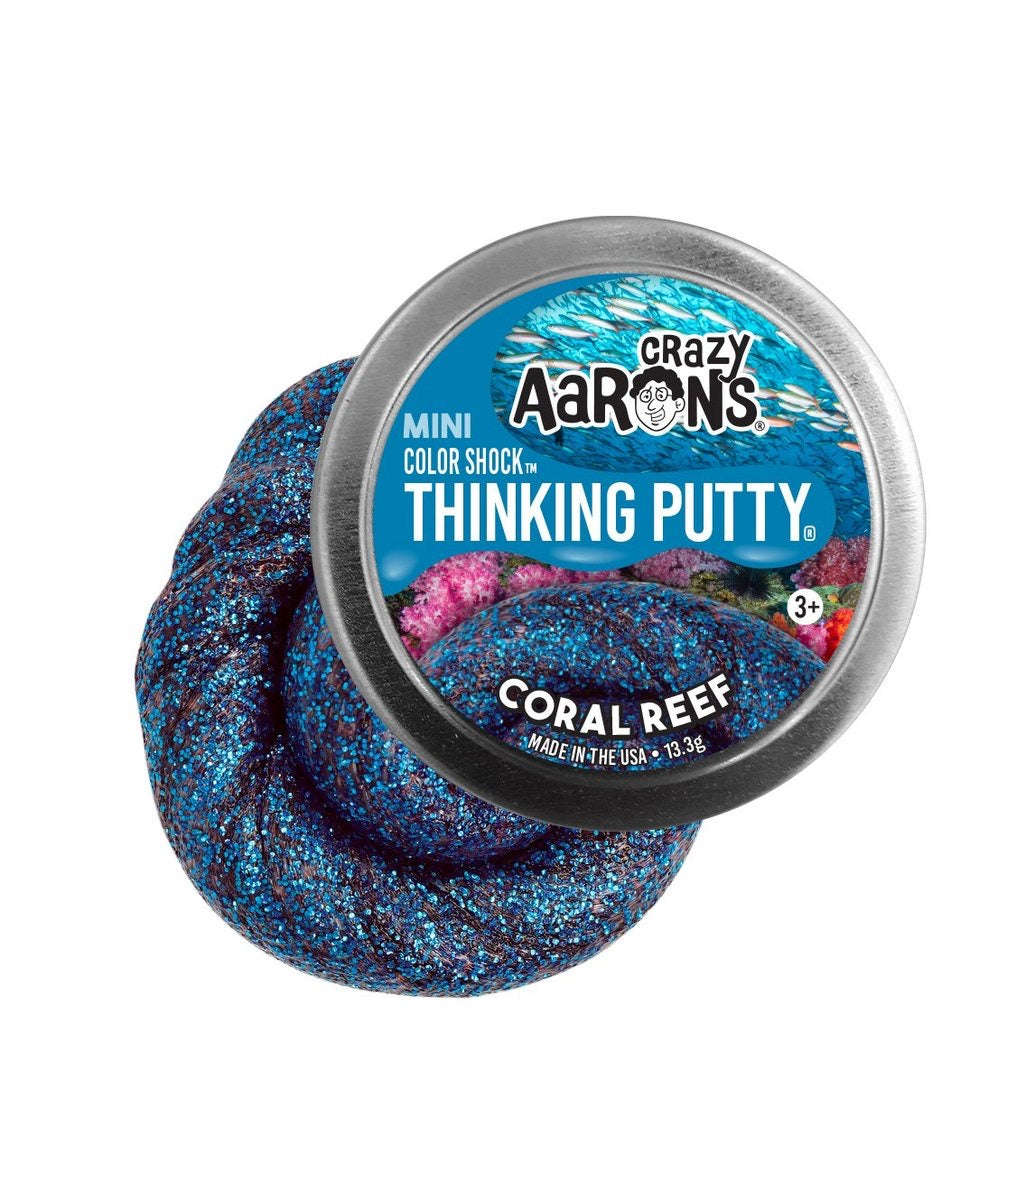 Coral Reef 2'' Tin Thinking Putty by Crazy Aaron’s